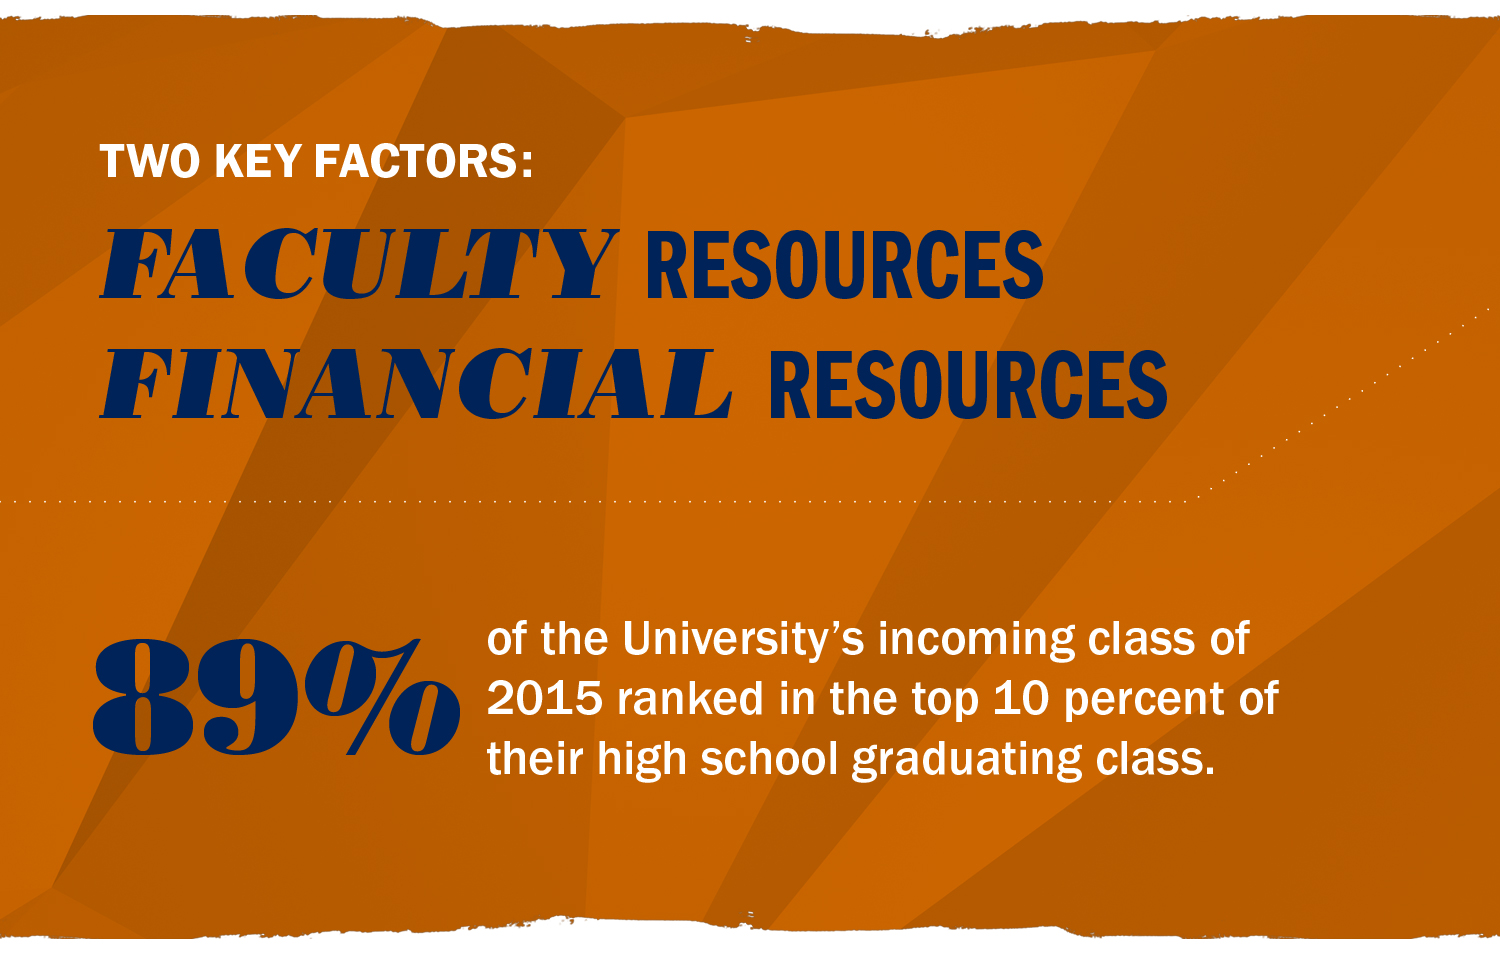 Text reads: Two key factors: Faculty Resources, Financial Resources. 89% of the University's incoming class of 2015 ranked in the top 10 percent of their high school graduating class.